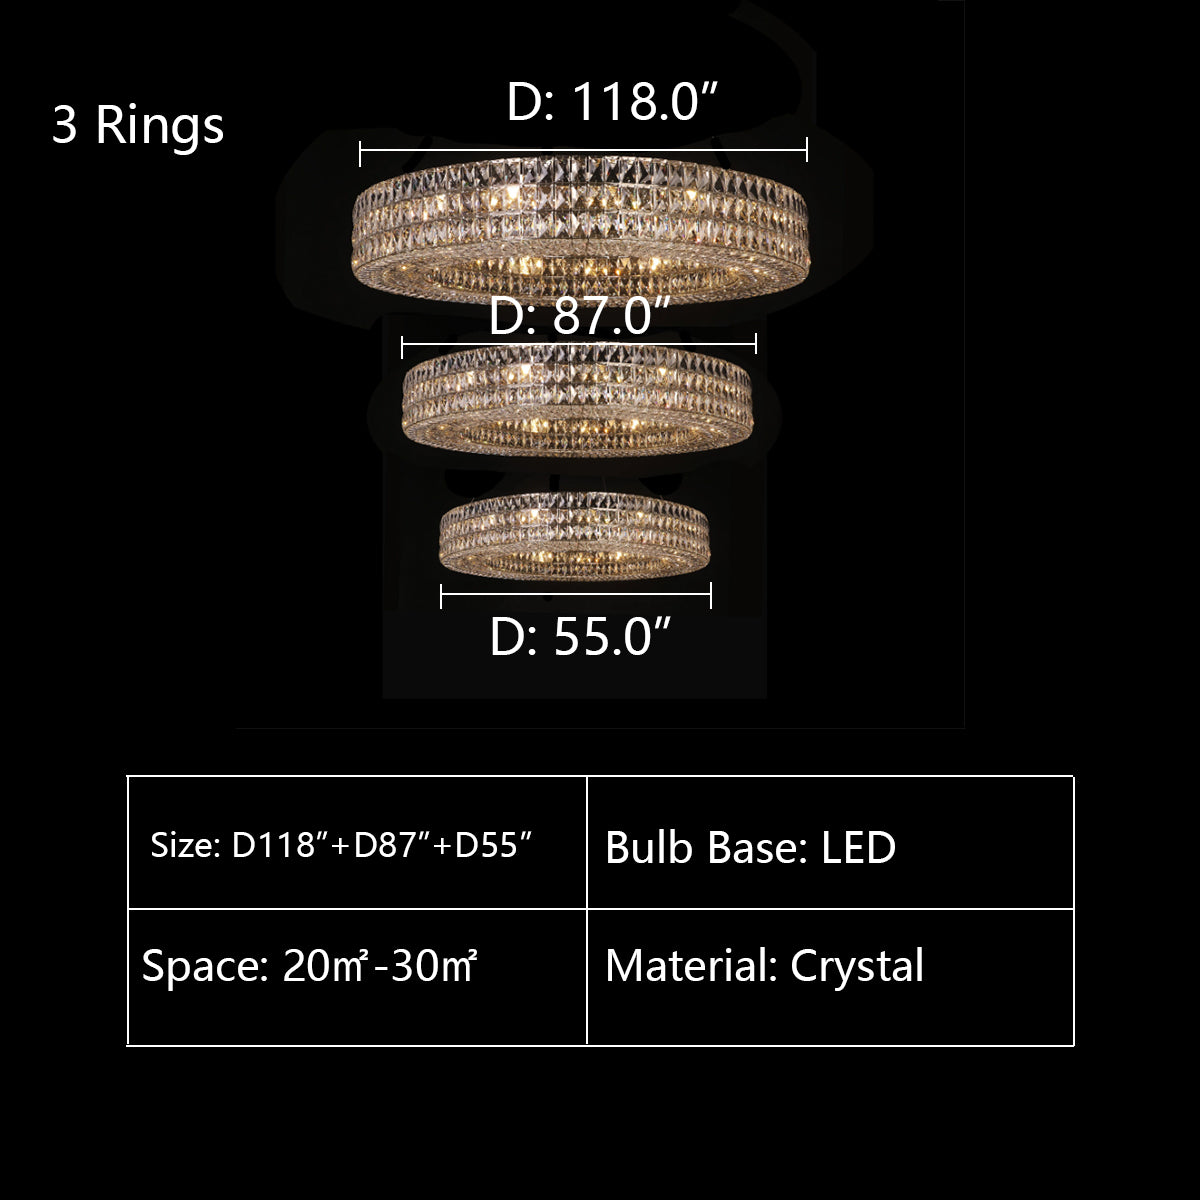 3Rings: D118.0" D87.0" D55.0" chandelier,chandeliers,crystal,rings,round,multi-tier,tiers,layers,ceiling,living room,high-ceiling room,foyer,3 rings,2rings,extra large,large,oversized,huge,big,long,high